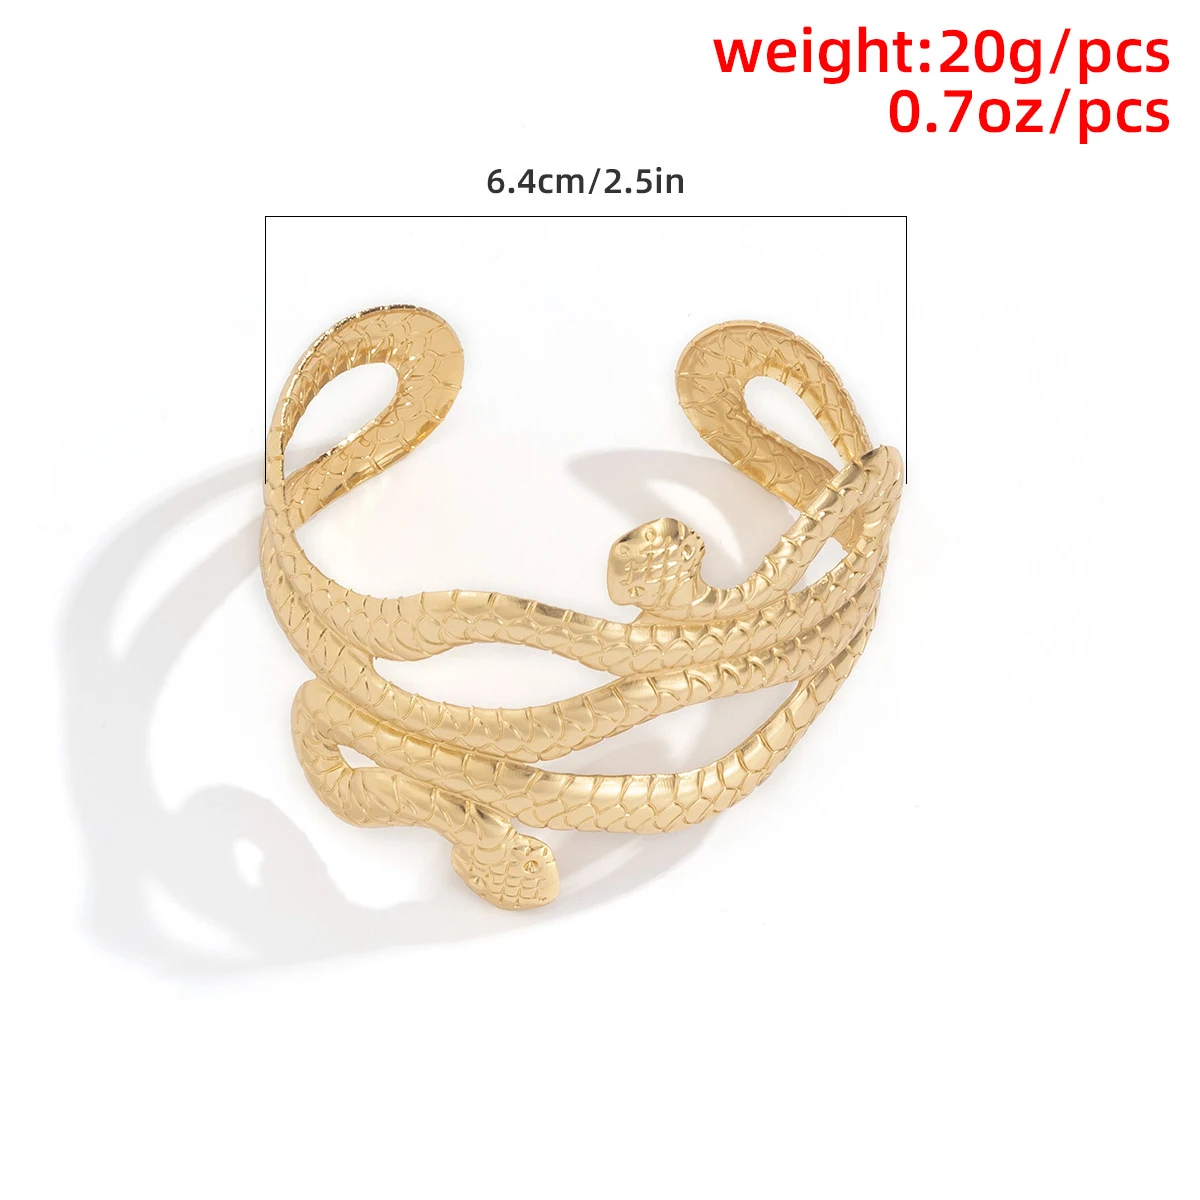 

New Arrival Punk Fashion Coiled Snake Spiral Upper Arm Cuff Armlet Armband Bangle Bracelet Men Jewelry For Women Party Barcelets